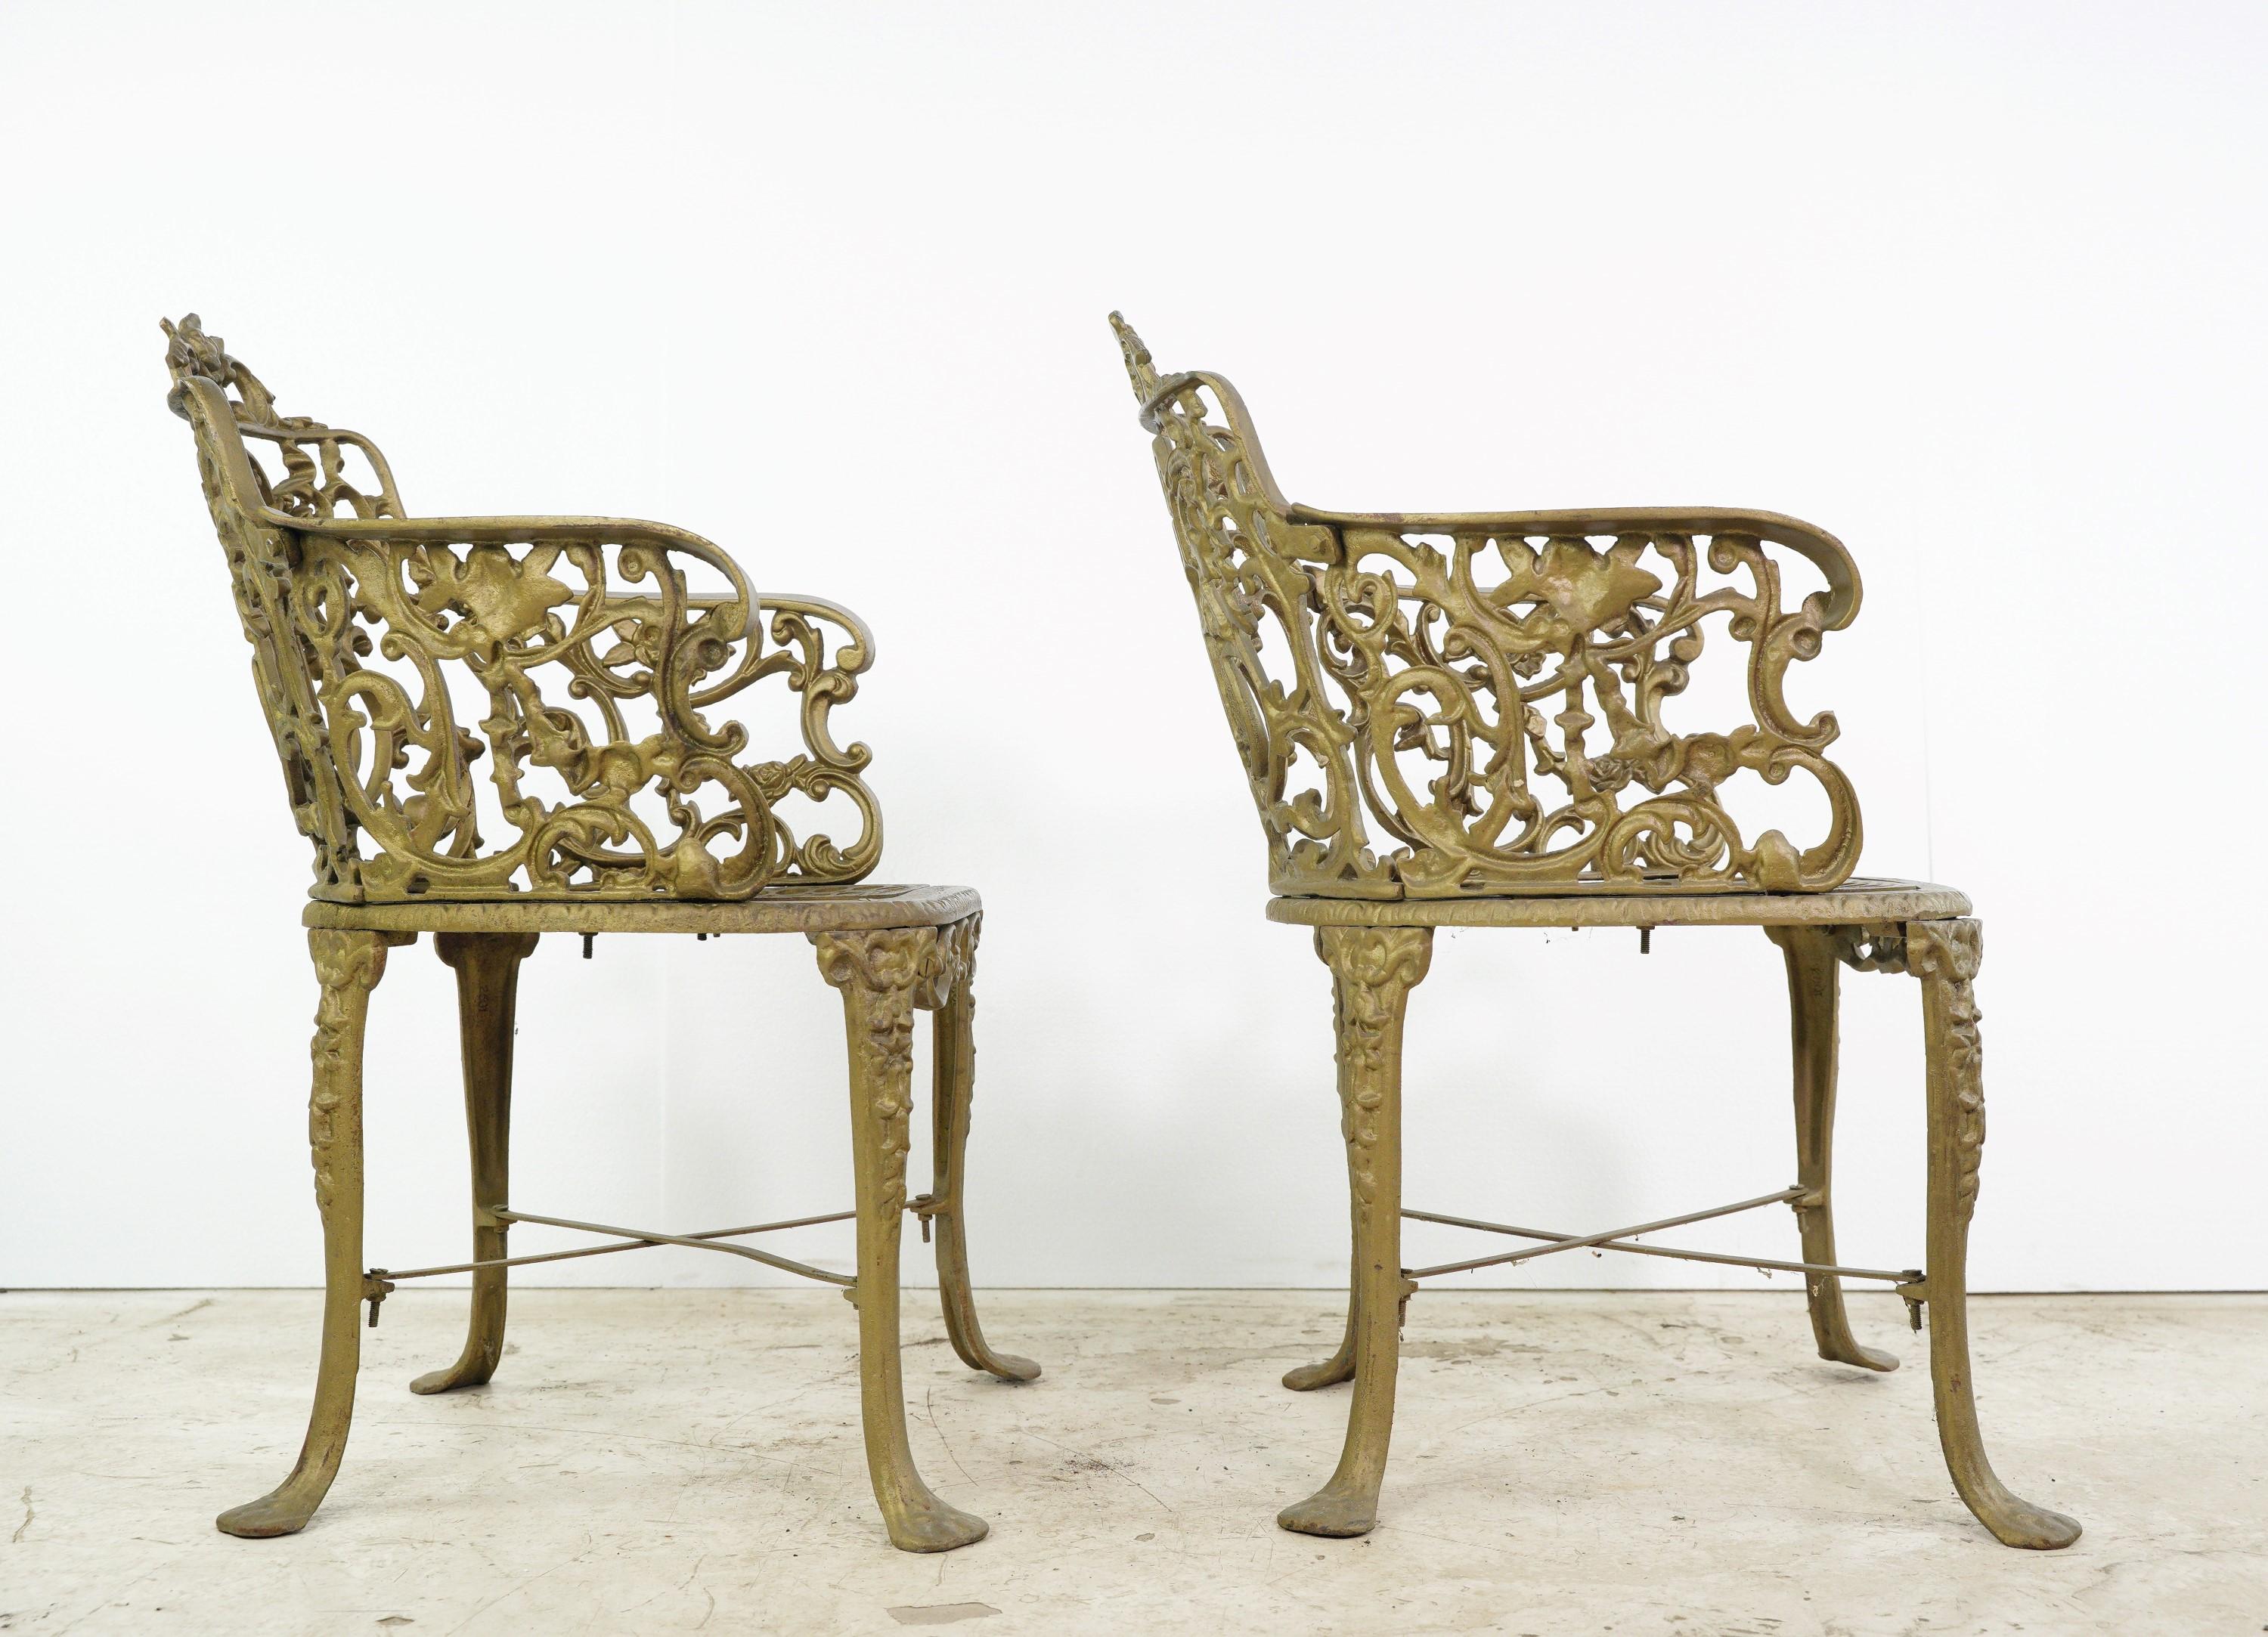 Ornate Cast Iron Garden Table & Two Chairs Set 2